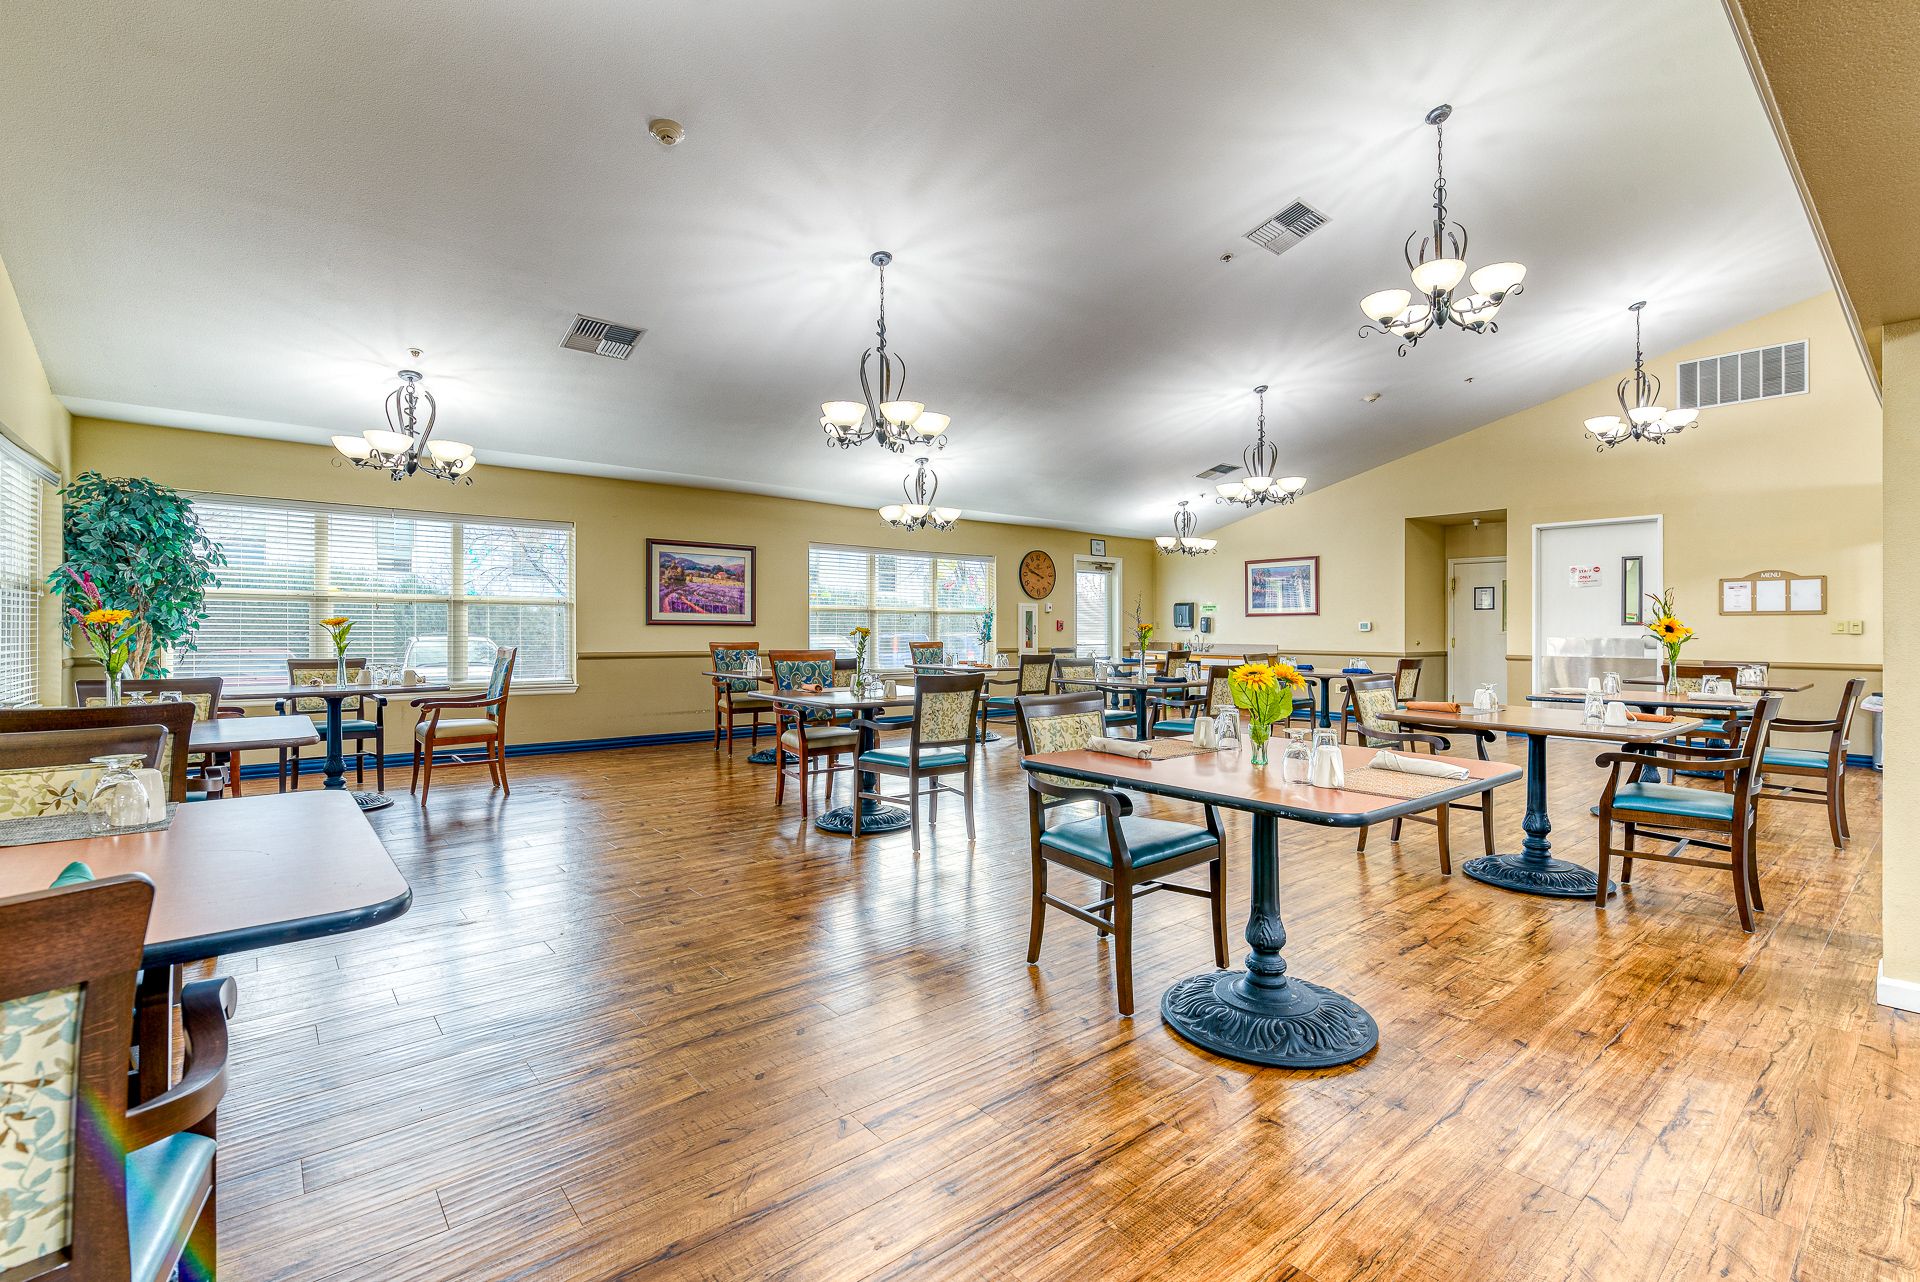 Awbrey Place Assisted Living and Memory Care 5